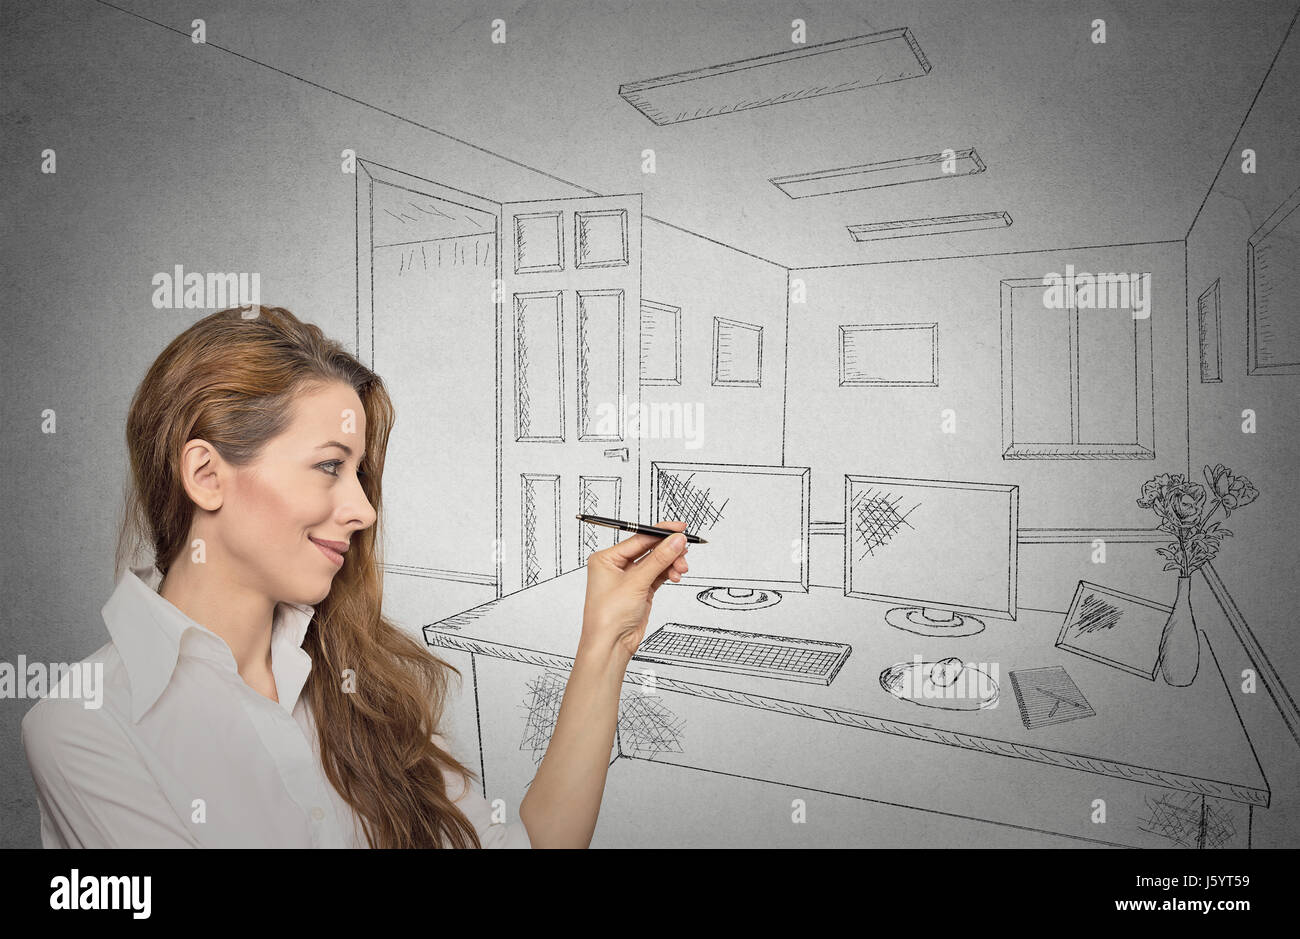 Portrait woman designer drawing with pen, pencil future apartment, architecture, home renovation, remodeling concept isolated on grey wall background. Stock Photo